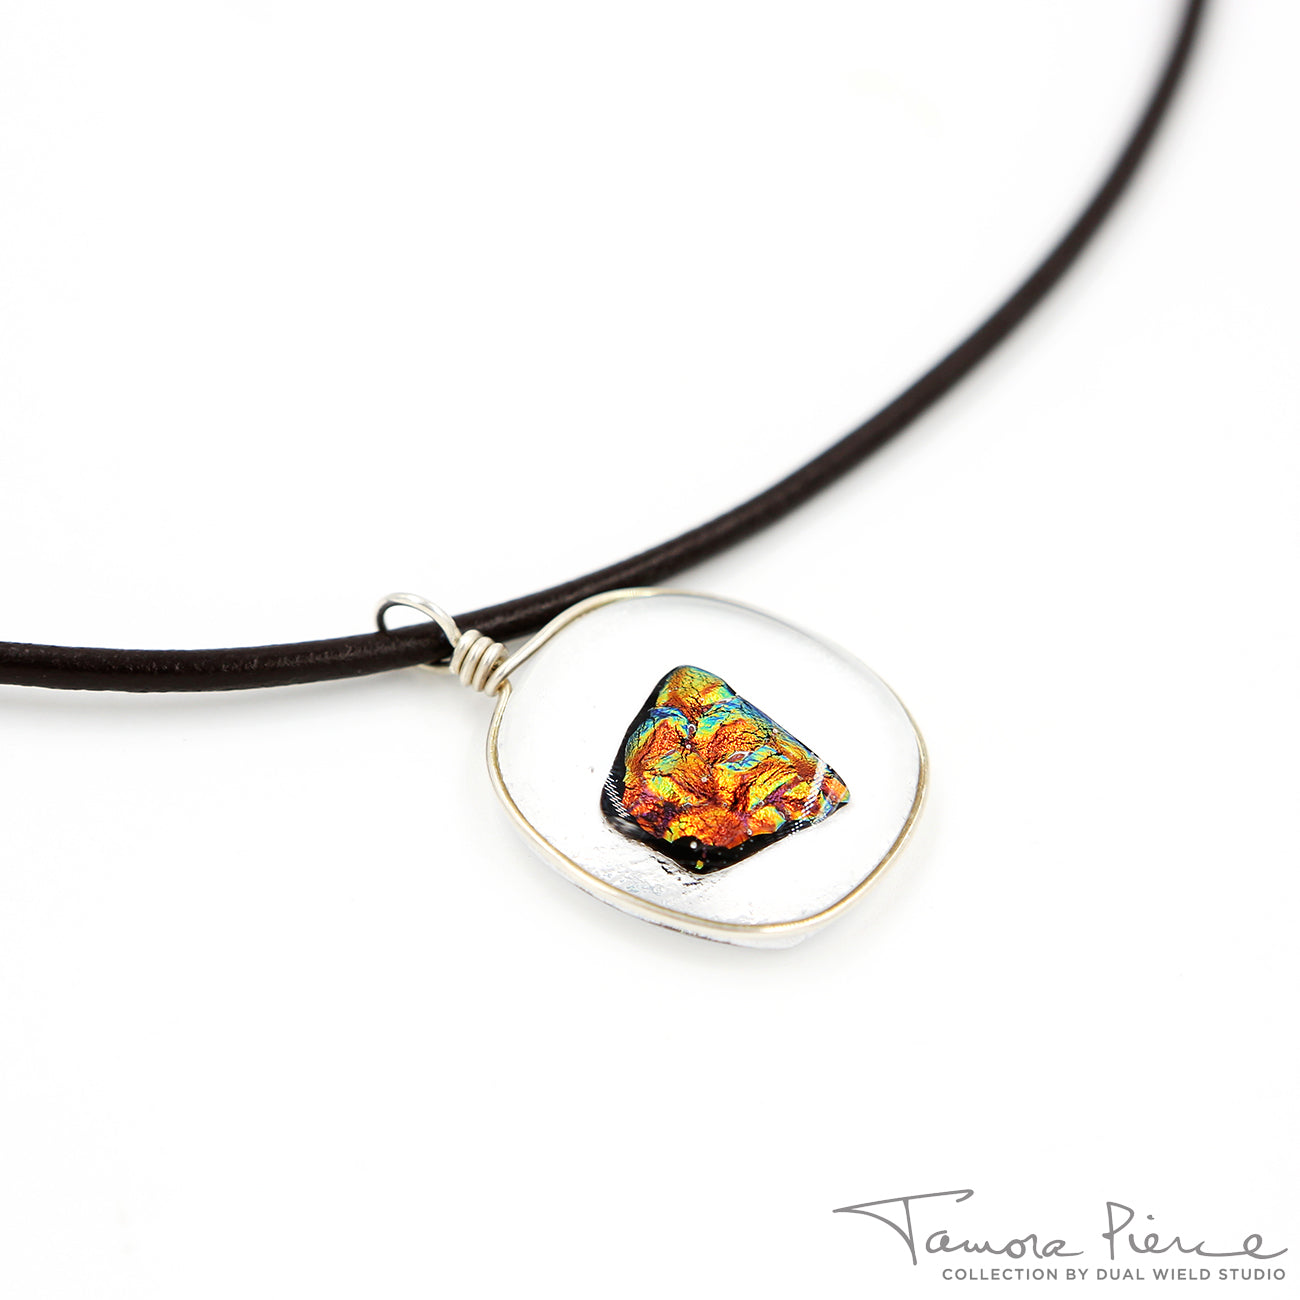 A molten lava-like looking stone with azure details floating in a gold-rimmed, circular glass pendant. Pendant is on brown necklace cord with white background.